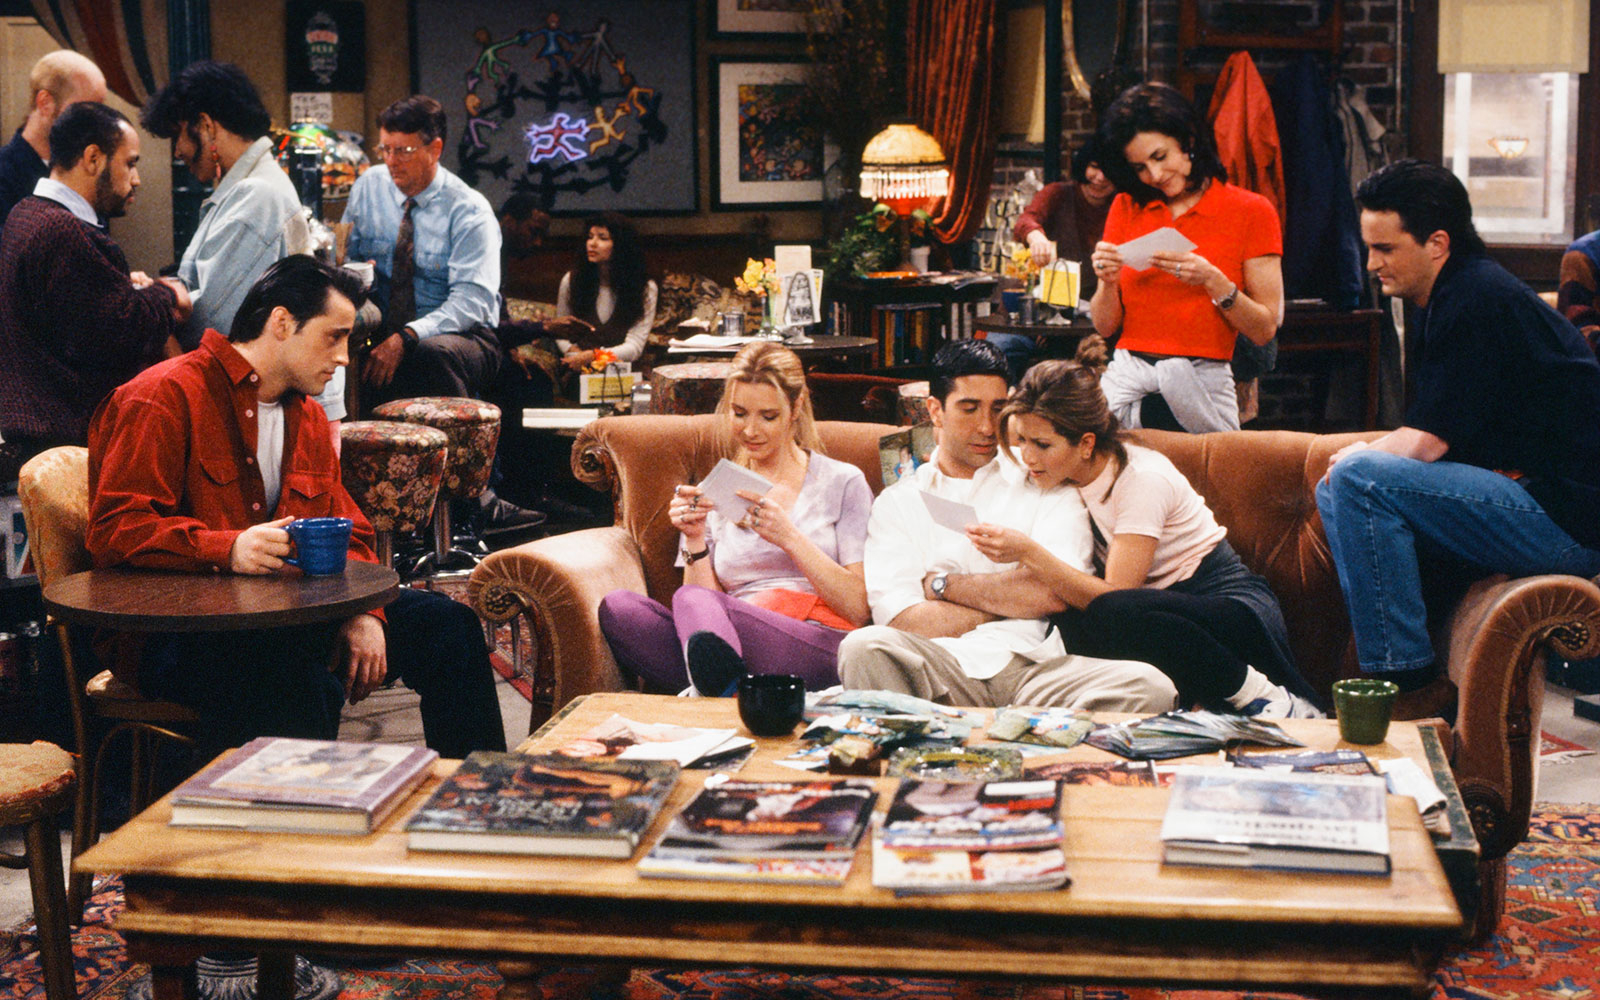 The First Batch of Tickets to London's FriendsFest Sold Out in 13 Minutes